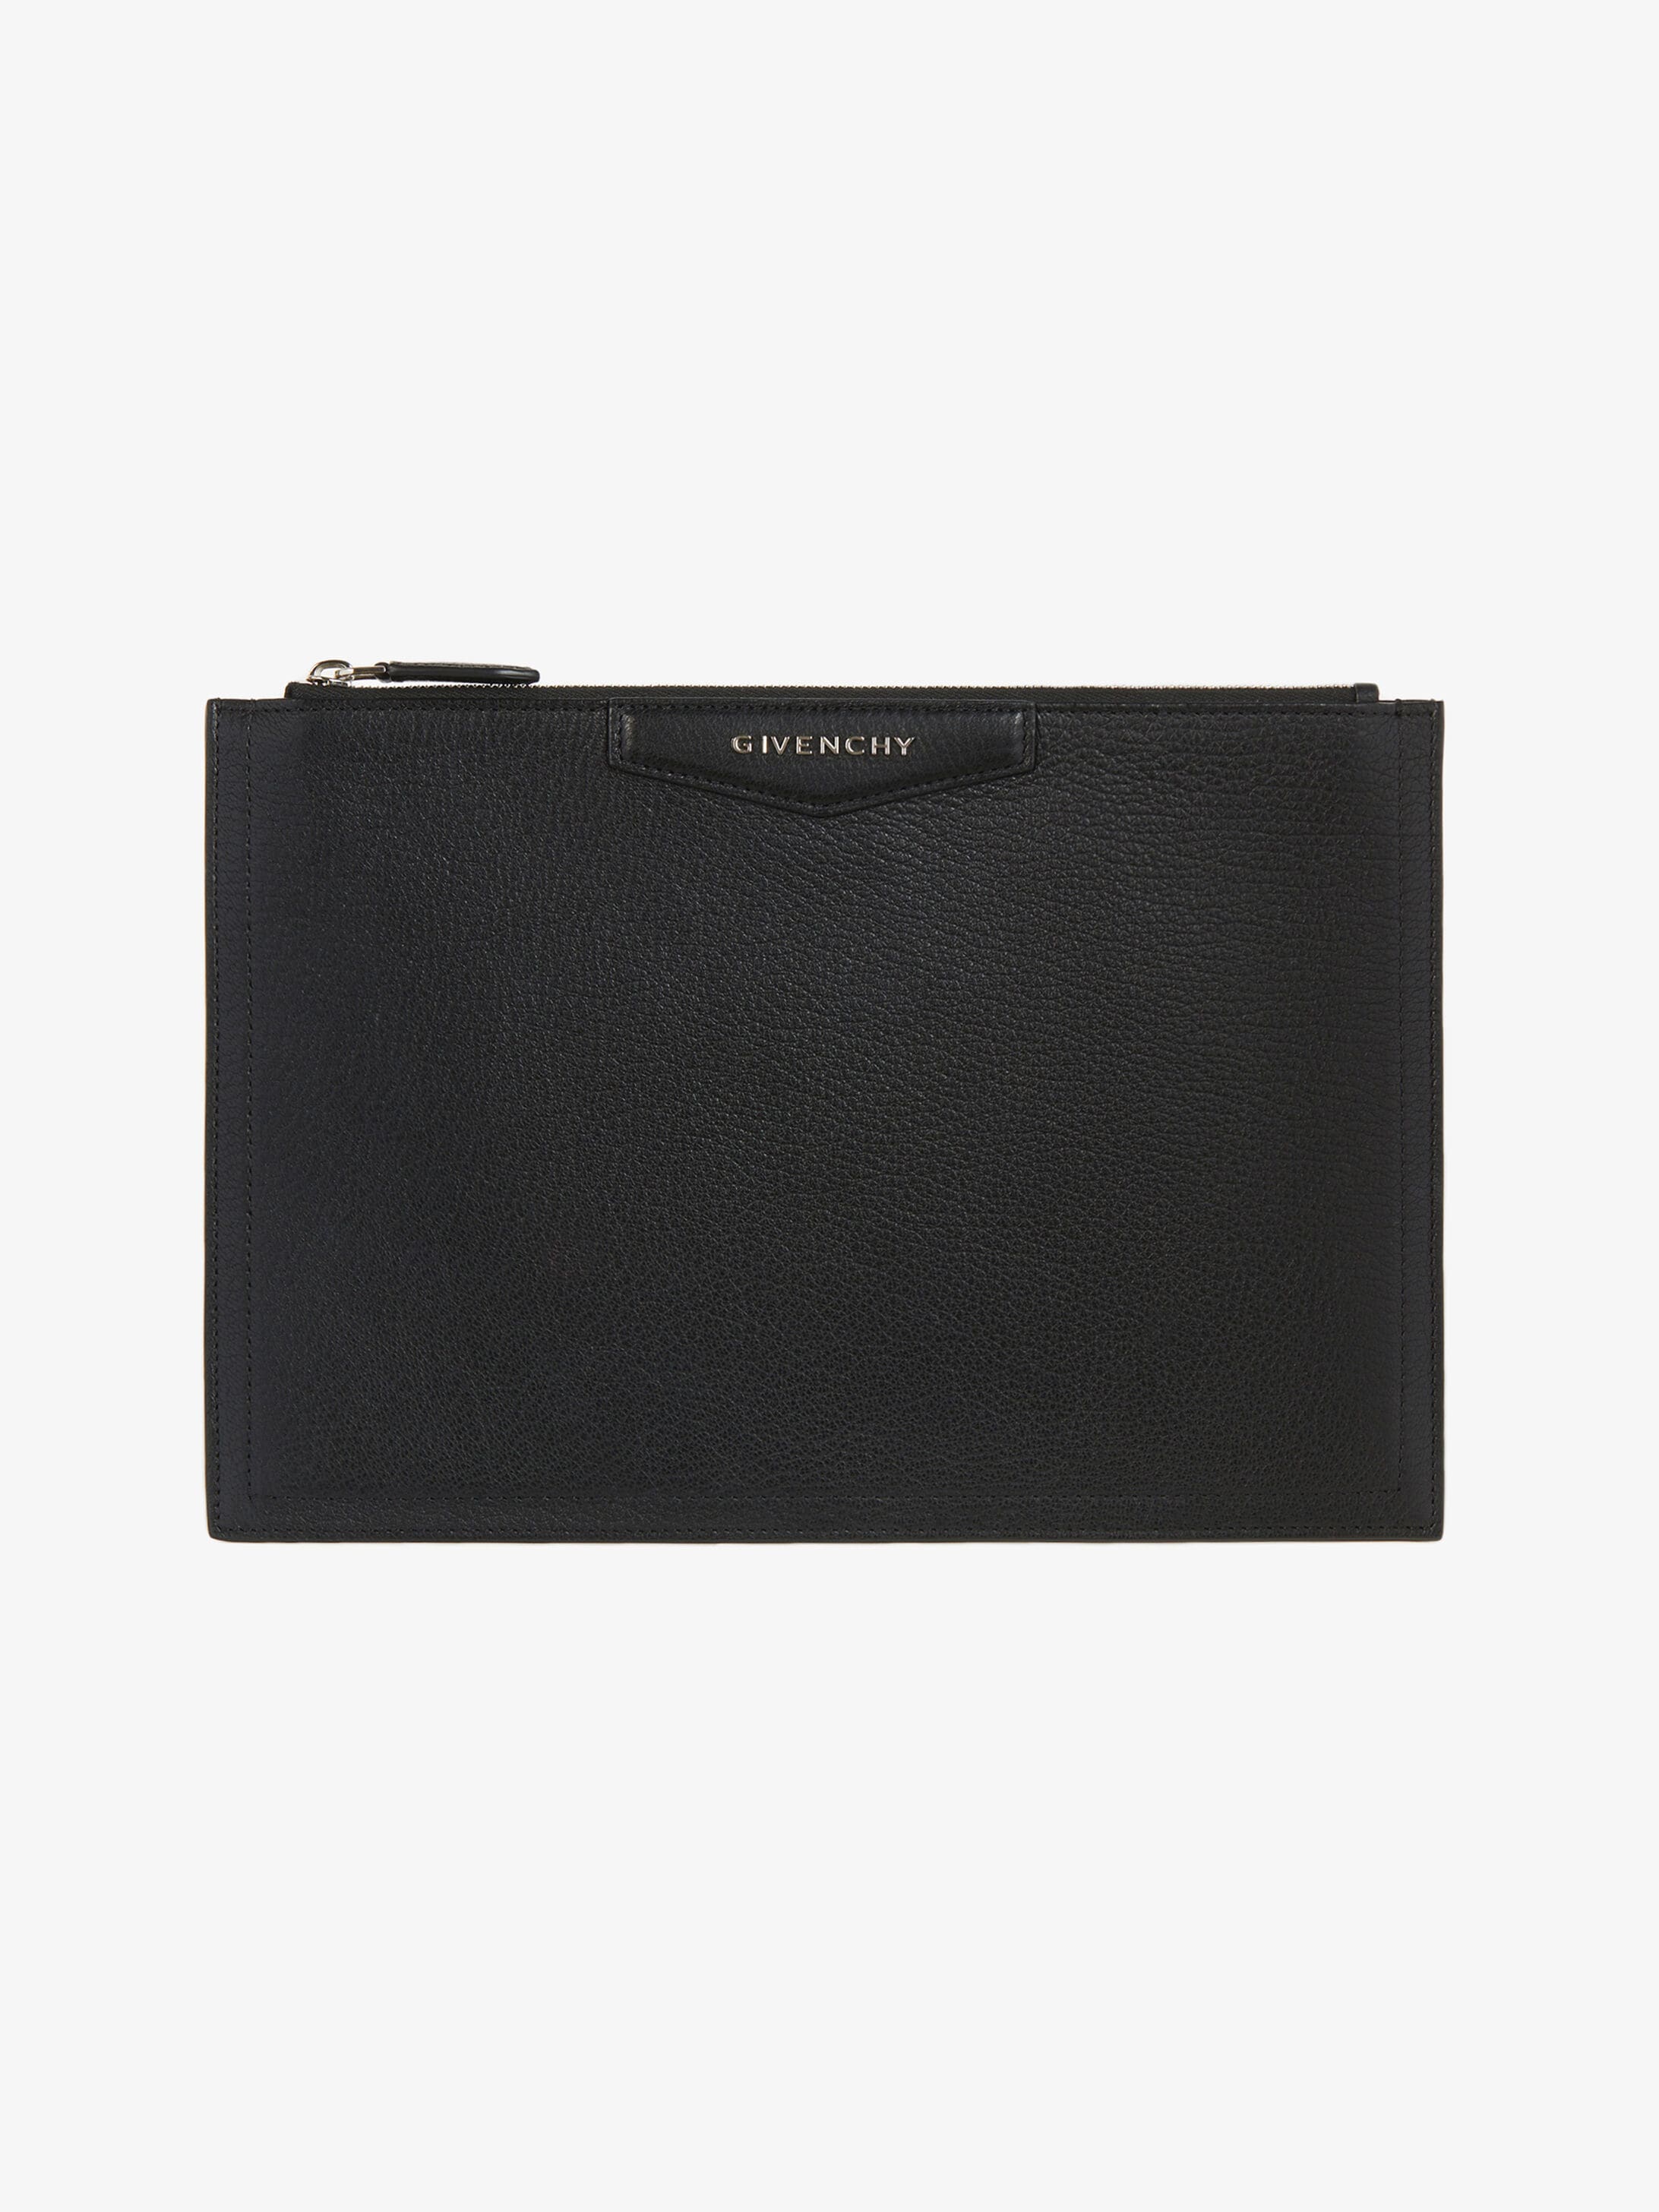 Givenchy Antigona pouch in grained 